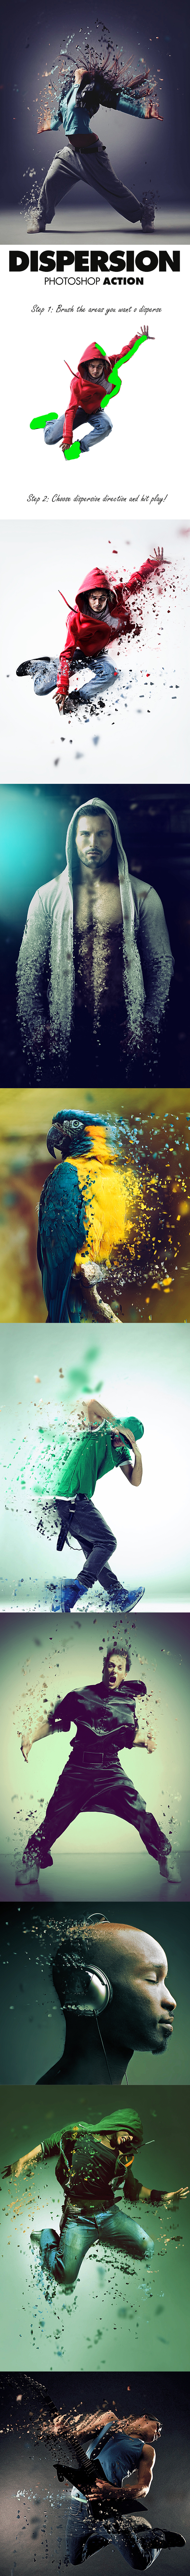 Graphics: 3d Dispersion Actions Atn Blast Break Burst Disperse Dispersion Effects Explode Explosion Look Low Poly Part Photo Photography Photoshop Professional Shatter Style